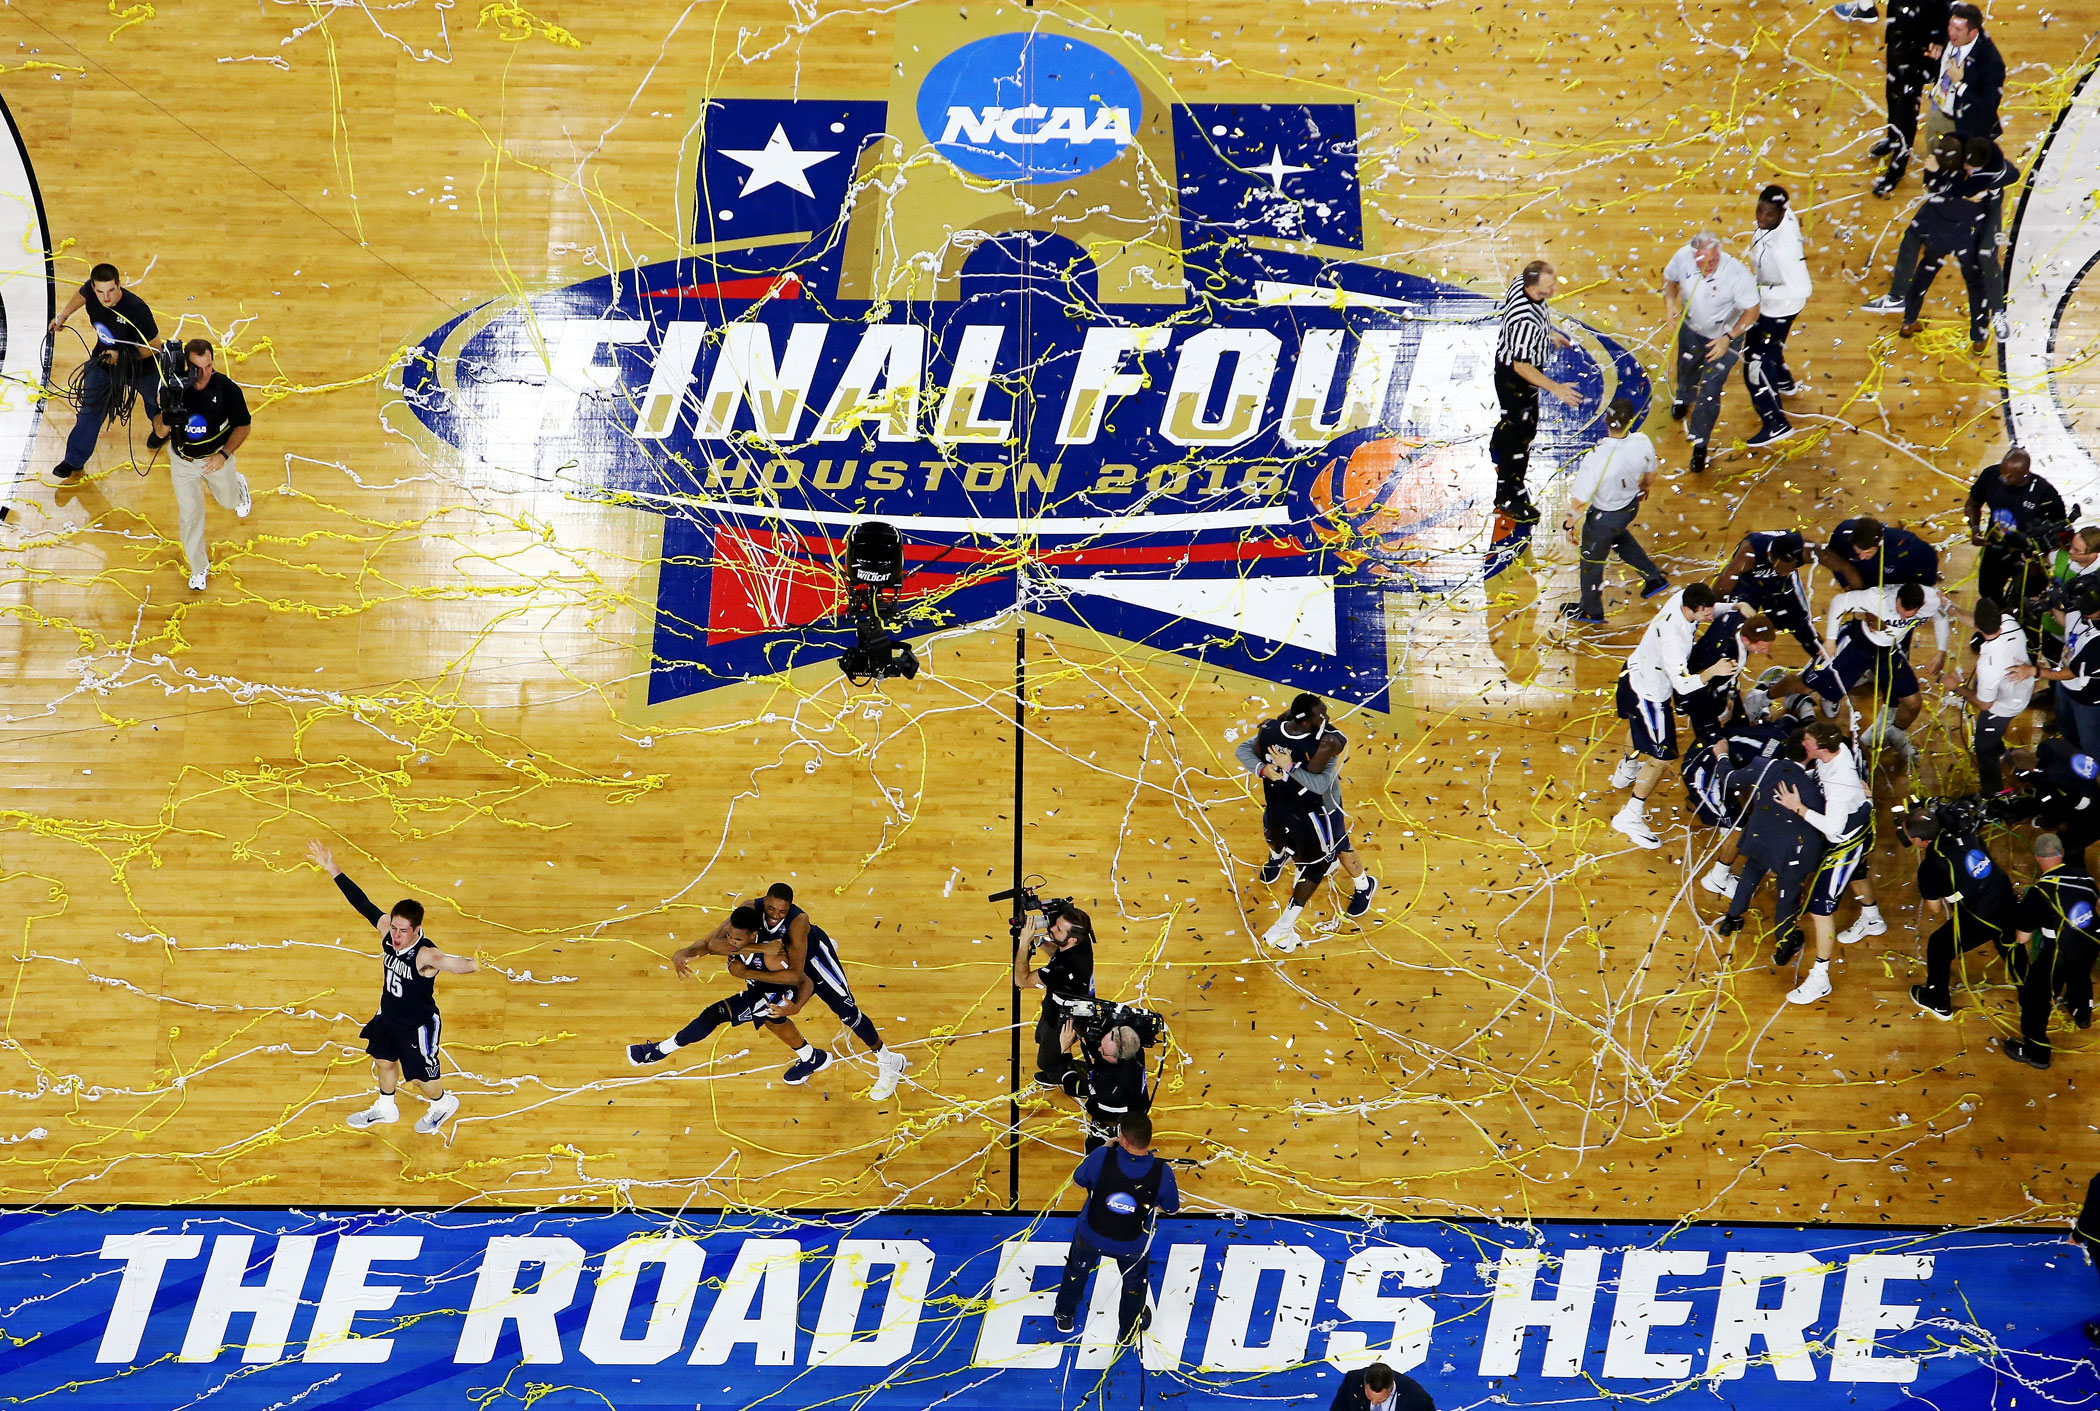 The Villanova Wildcats celebrate defeating the North Carolina Tar Heels 77-74 to win the 2016 NCAA college basketball National Championship game on April 4, 2016 in Houston.